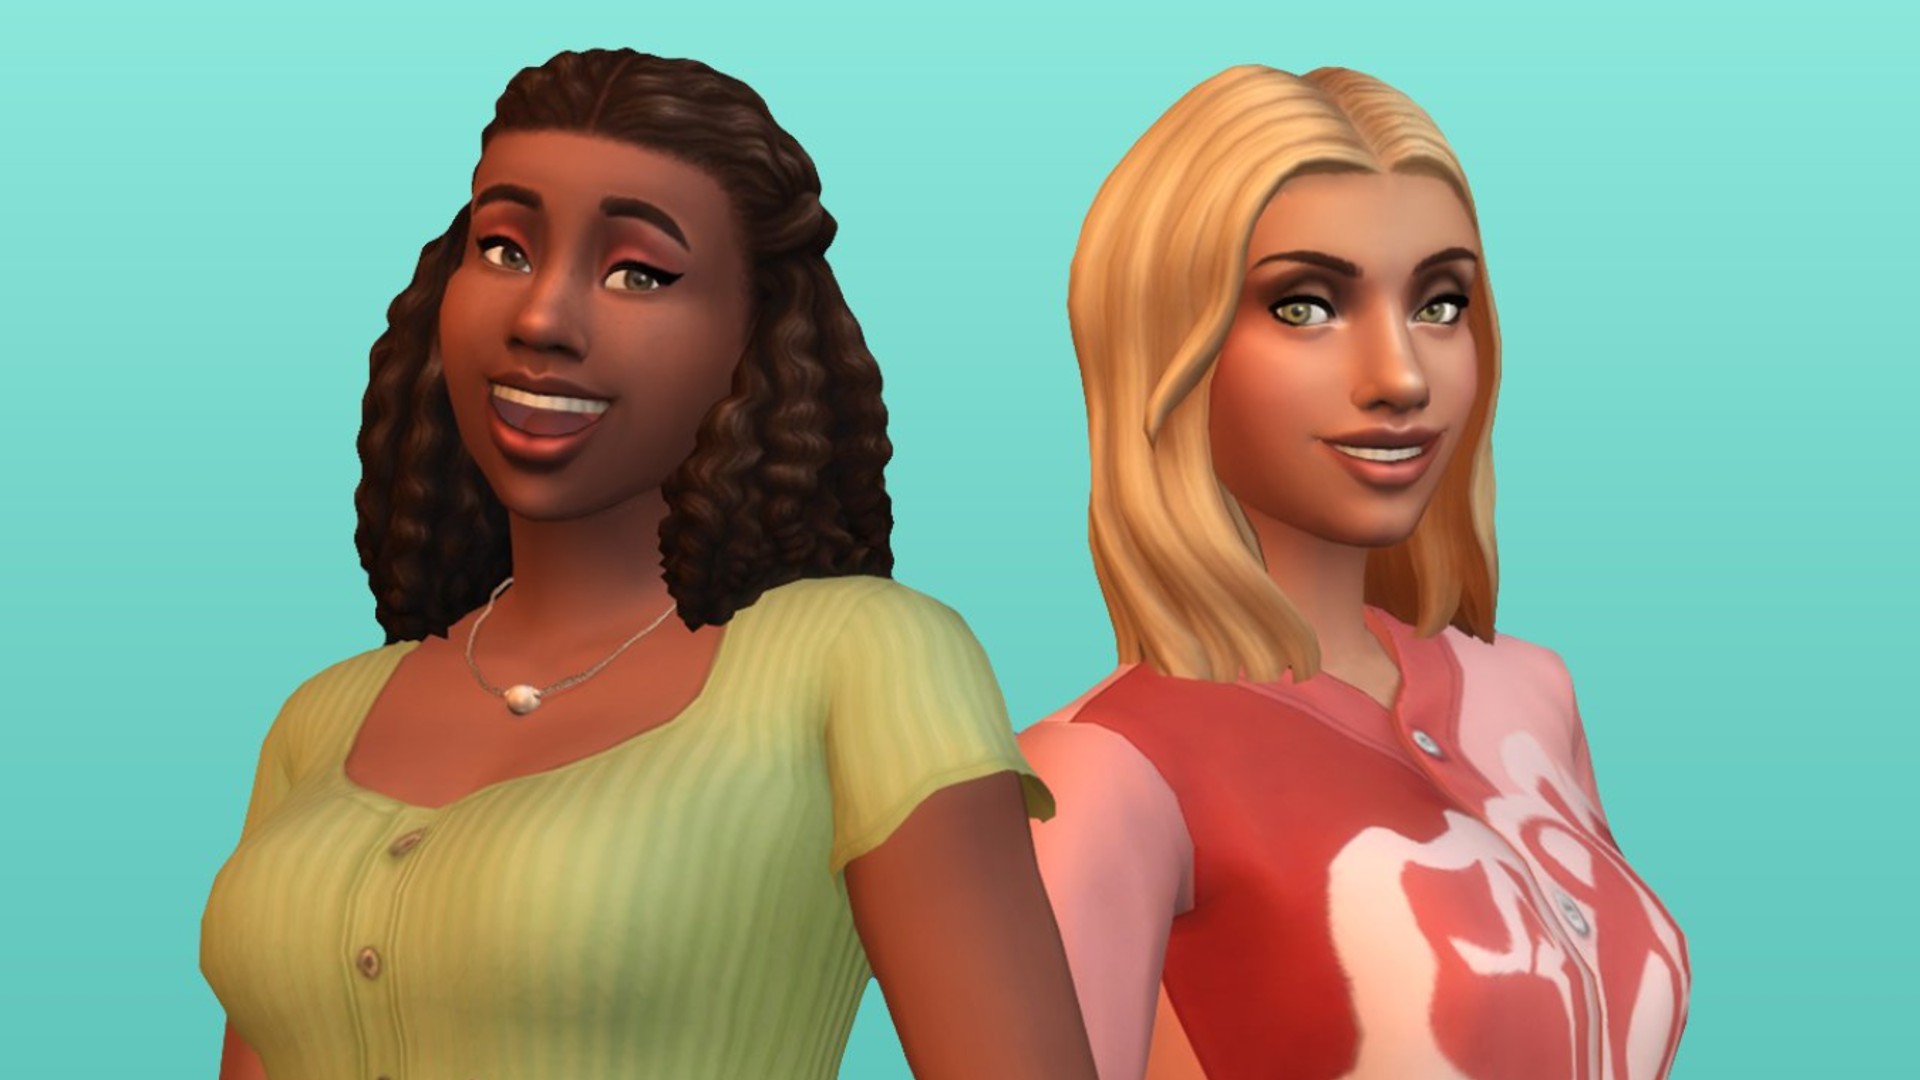 The Sims 5 mods and what to expect from the next Sims game